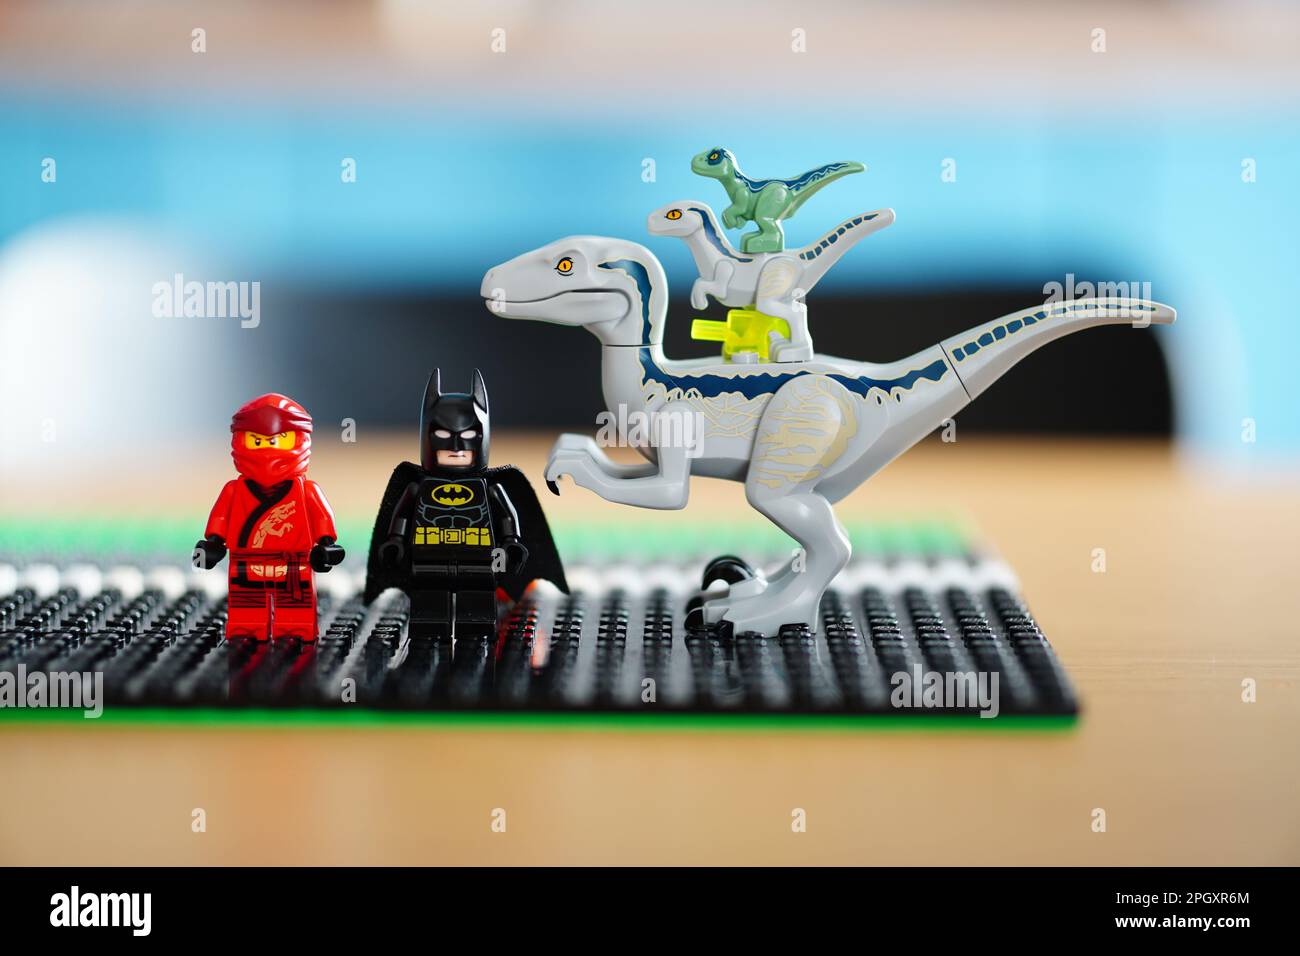 Two Lego figures sit side-by-side with a small white dinosaur, enjoying a moment of companionship Stock Photo